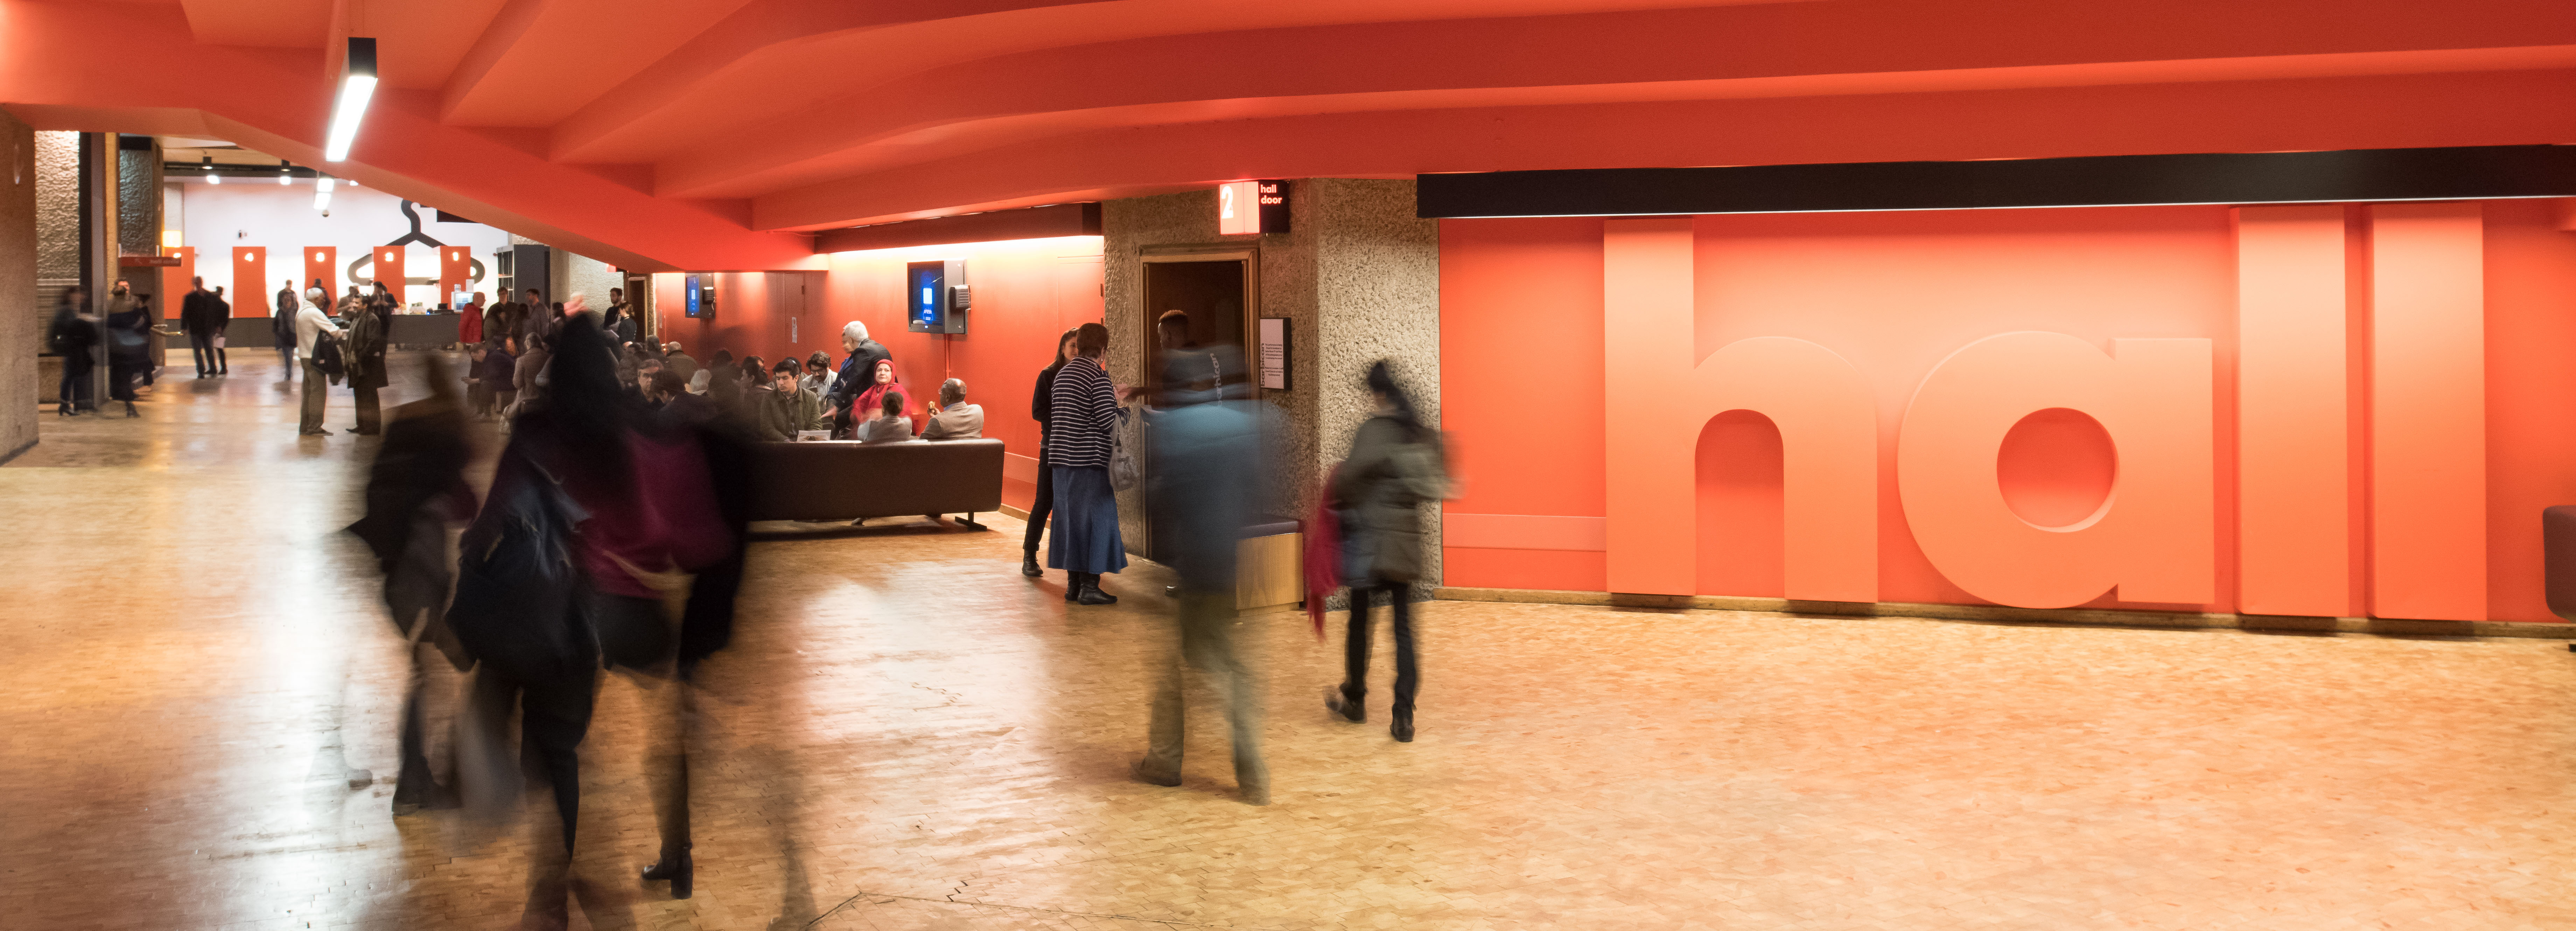 People standing in the foyer at the Barbican Centre